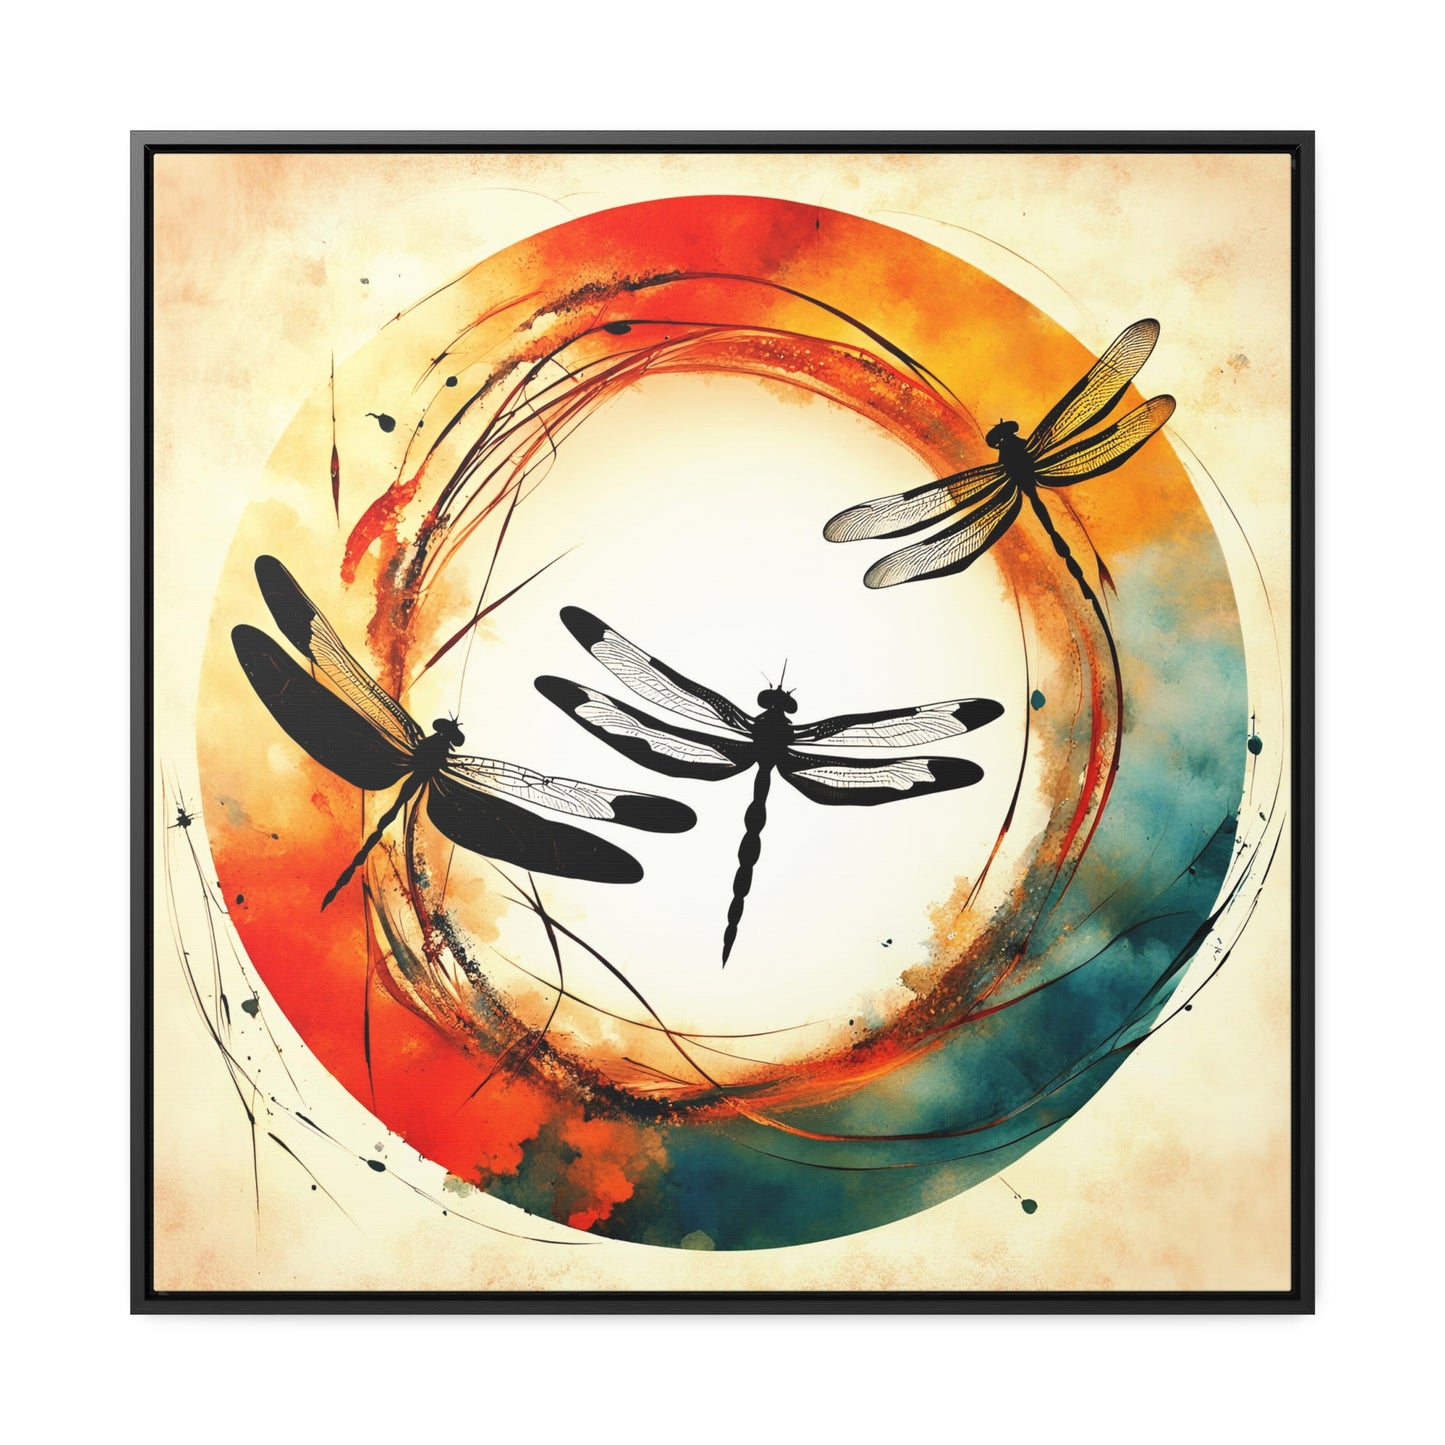 Dragonflies Silhouettes in a colorful Enso circle Print on Canvas in a Floating Frame - Spiritual and Meditation Wall Decor